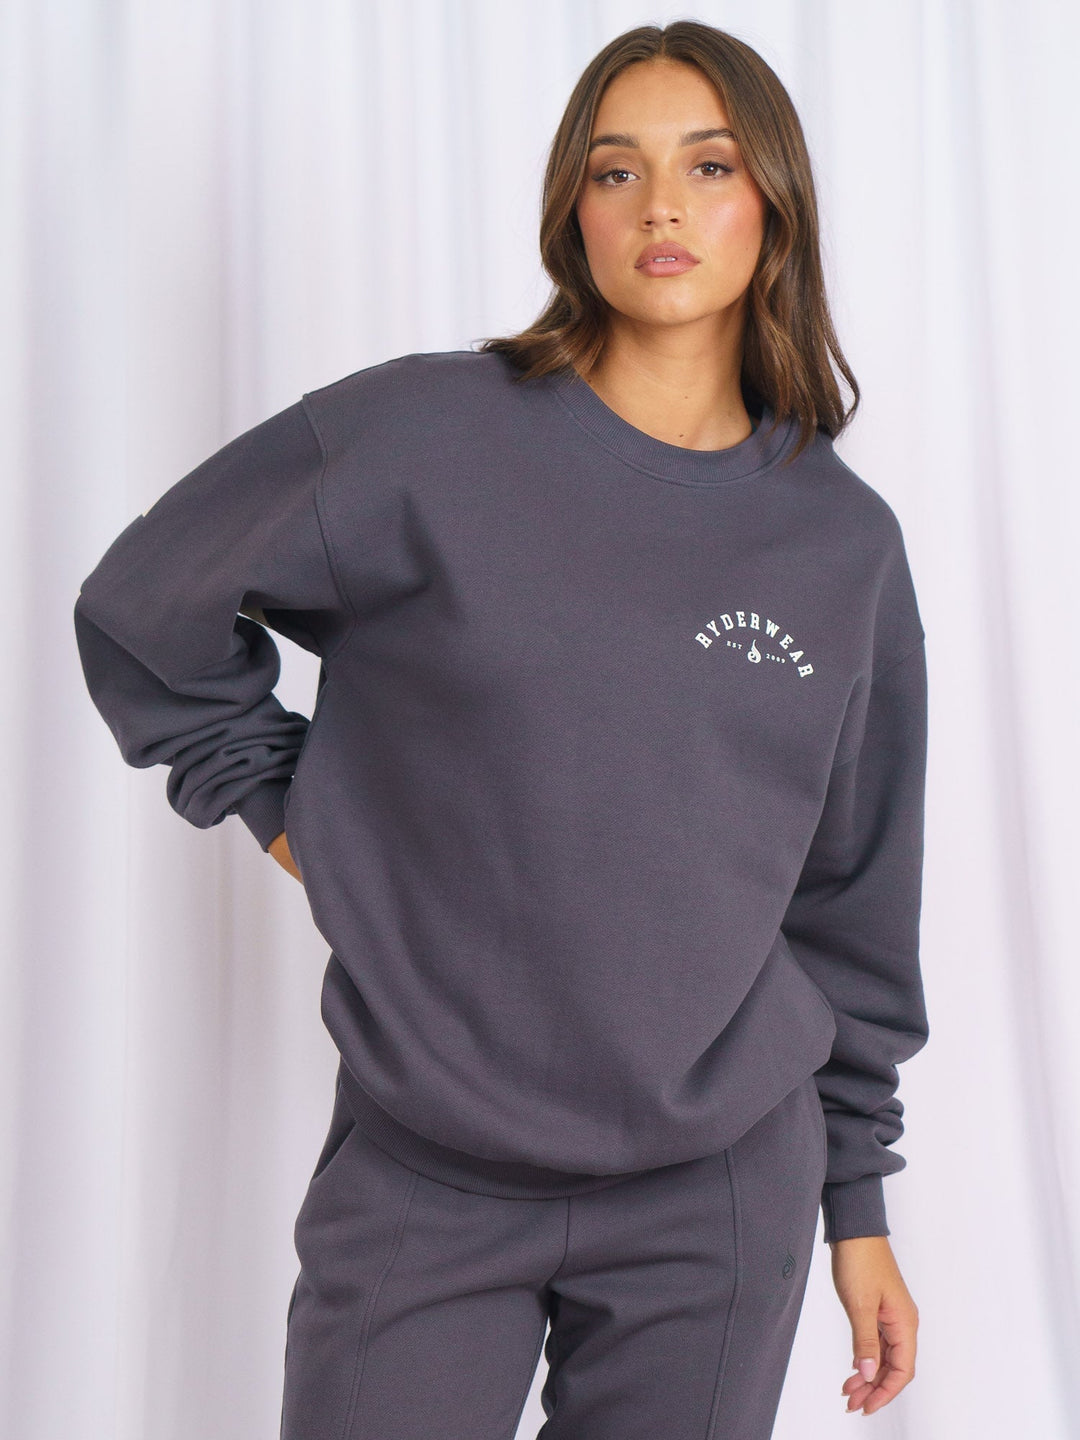 Unisex Collegiate Sweater - Charcoal Clothing Ryderwear 